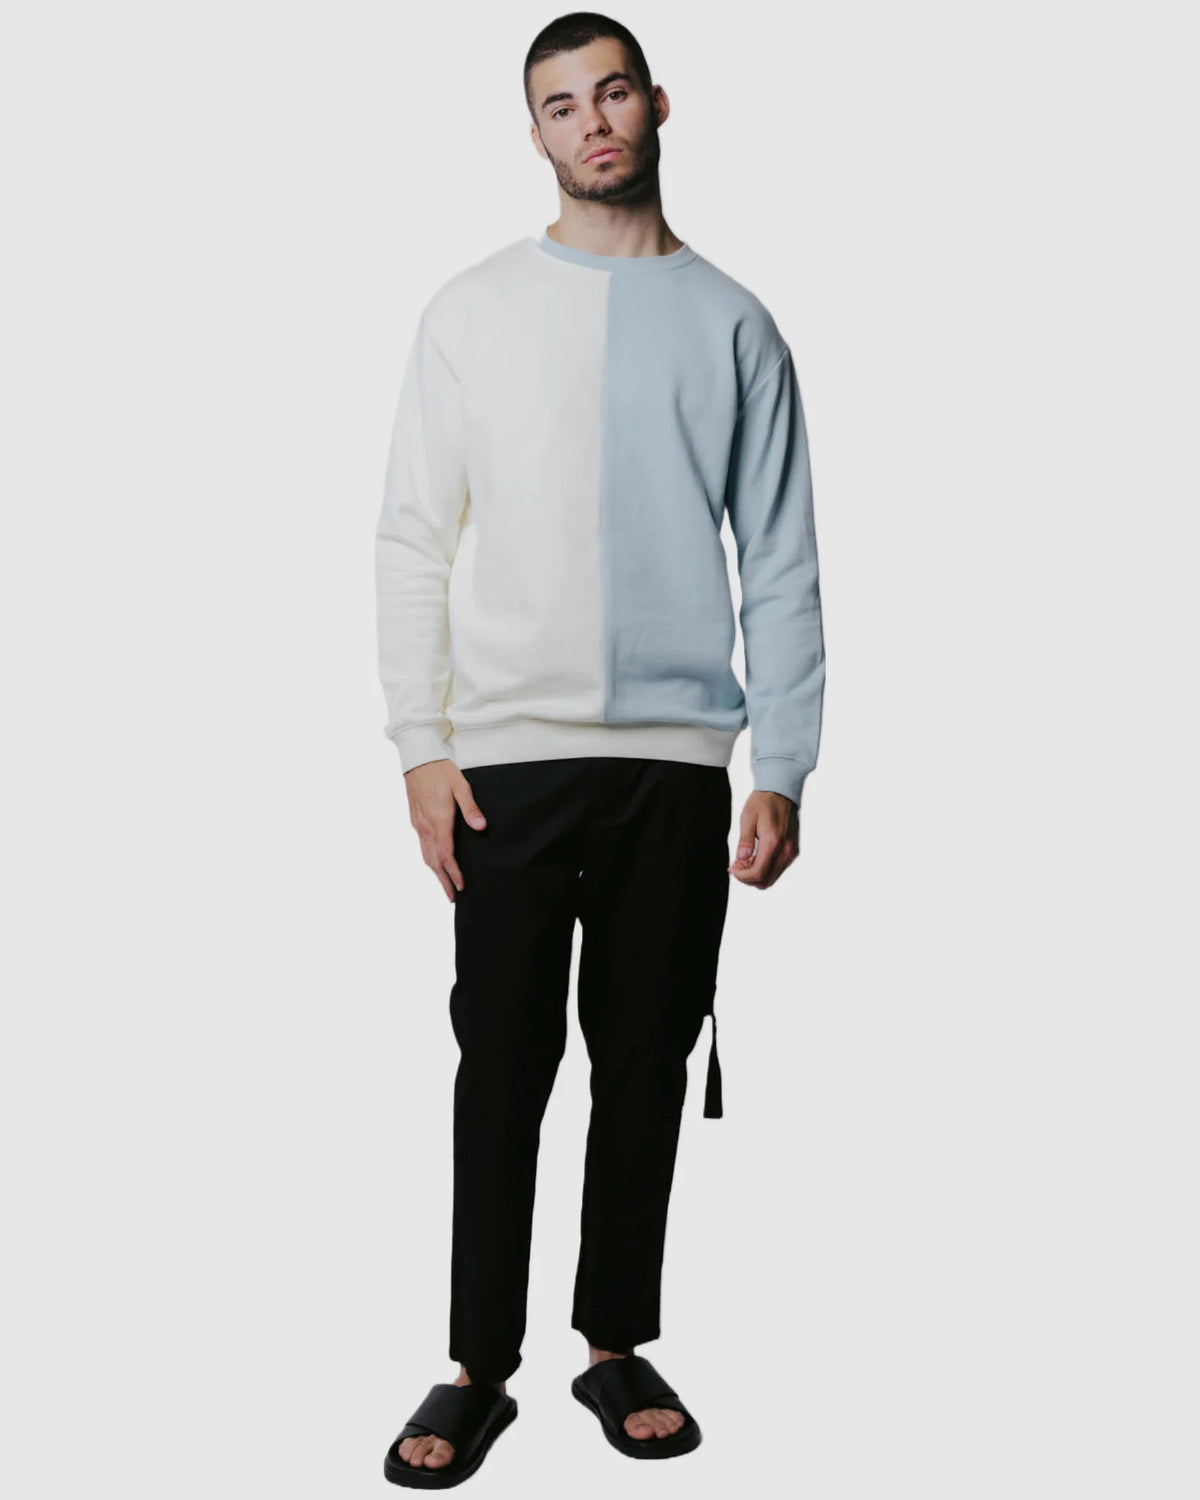 Justin Cassin Ace Jumper in Ivory/Mint Color 7